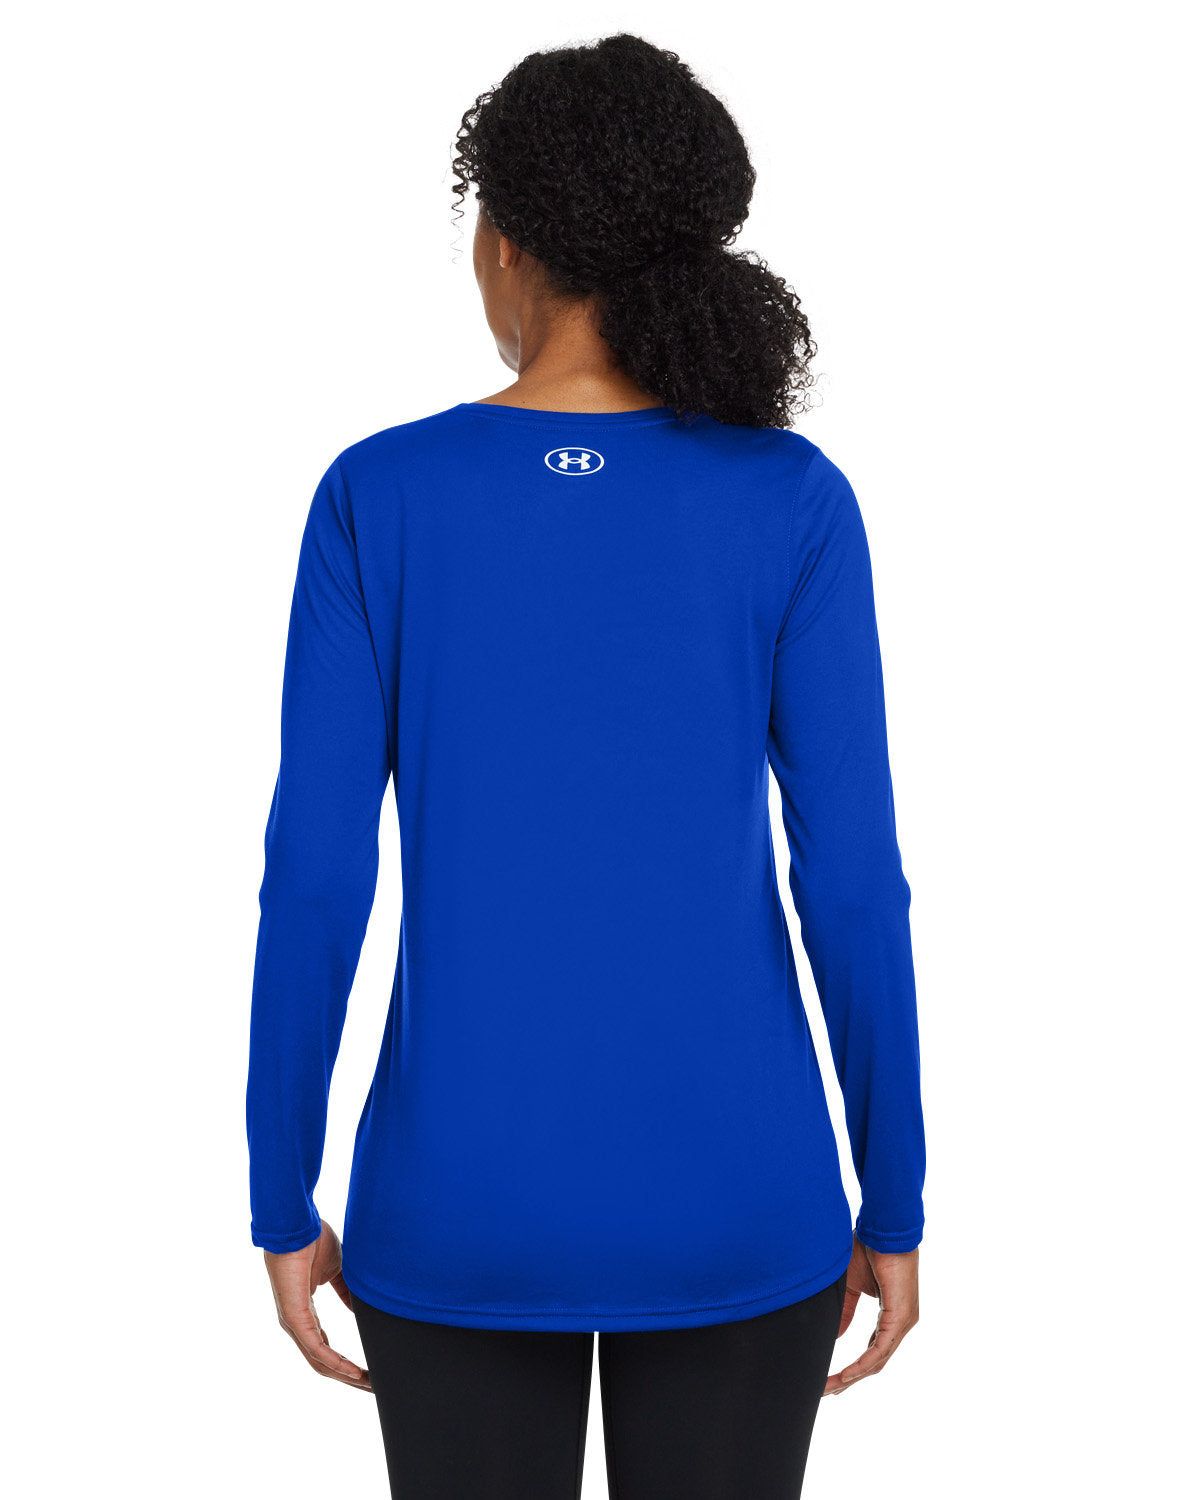 Under Armour Ladies Tech Long-Sleeve Customized T-Shirts, Royal